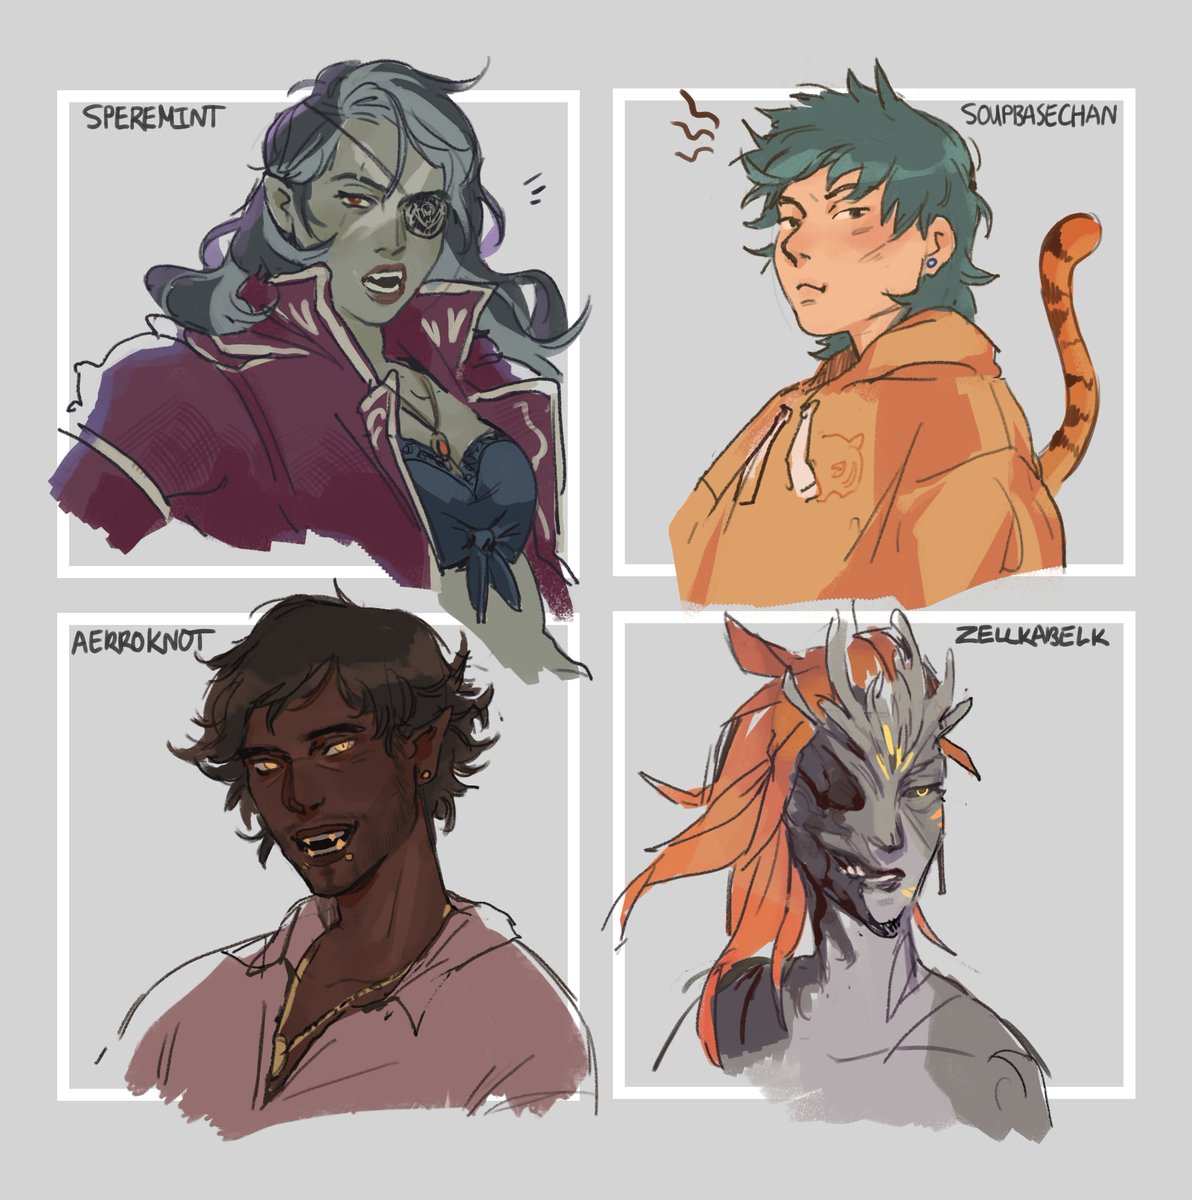 its always so much fun to draw ppl's ocs, sorry if i didn't get to yours! 